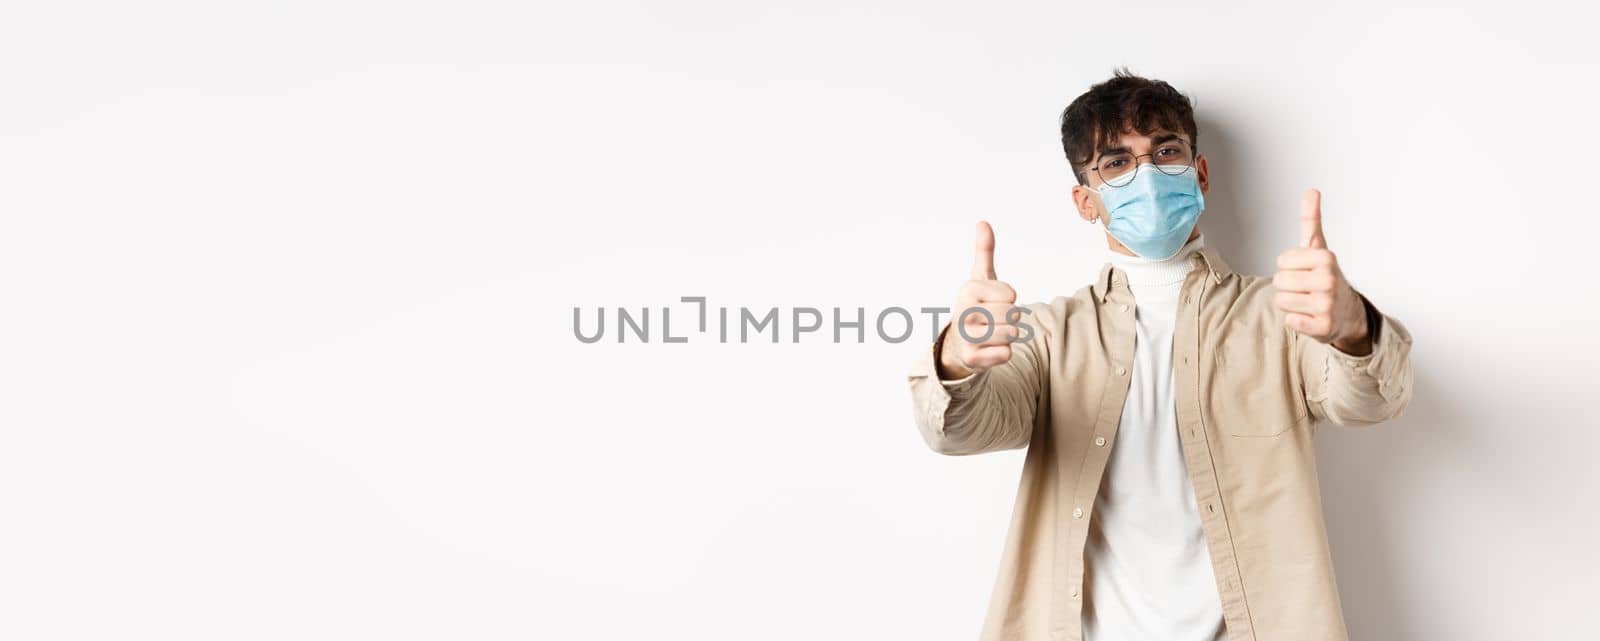 Coronavirus, health and real people concept. Smiling guy in medical mask showing thumbs up, wearing glasses, standing on white background.